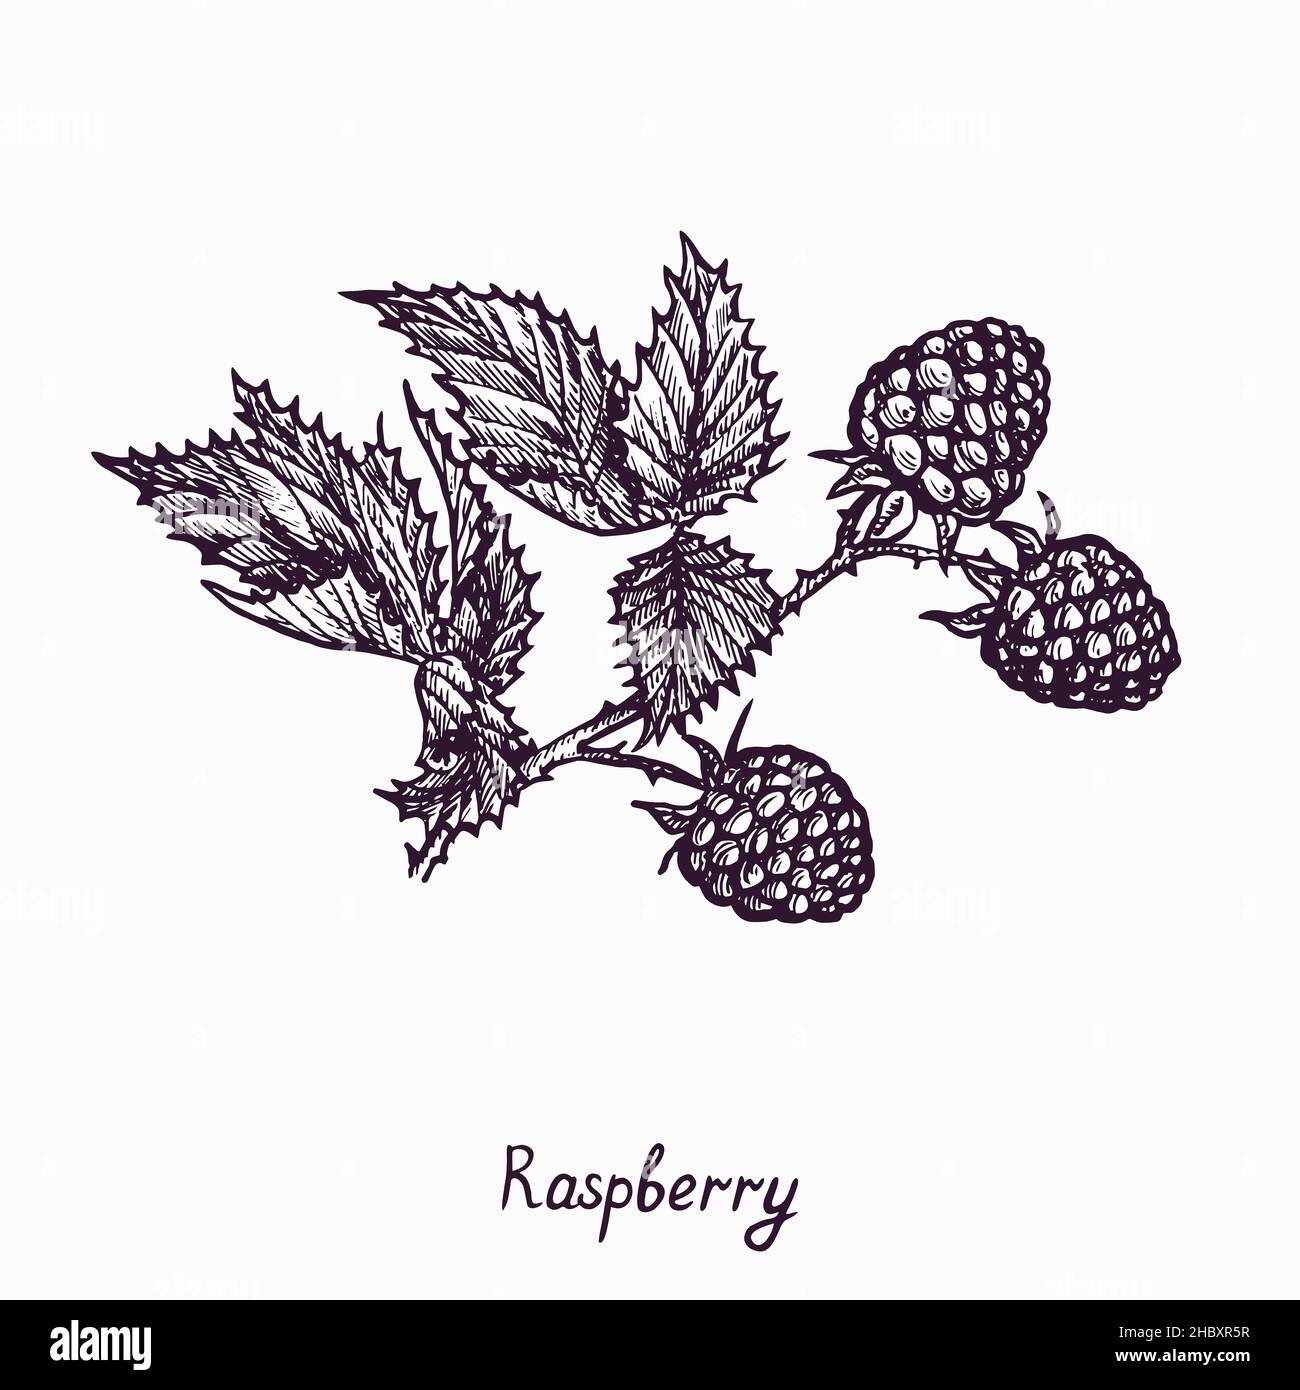 Raspberry branch with berries and leaves, simple doodle drawing with inscription, gravure style Stock Photo